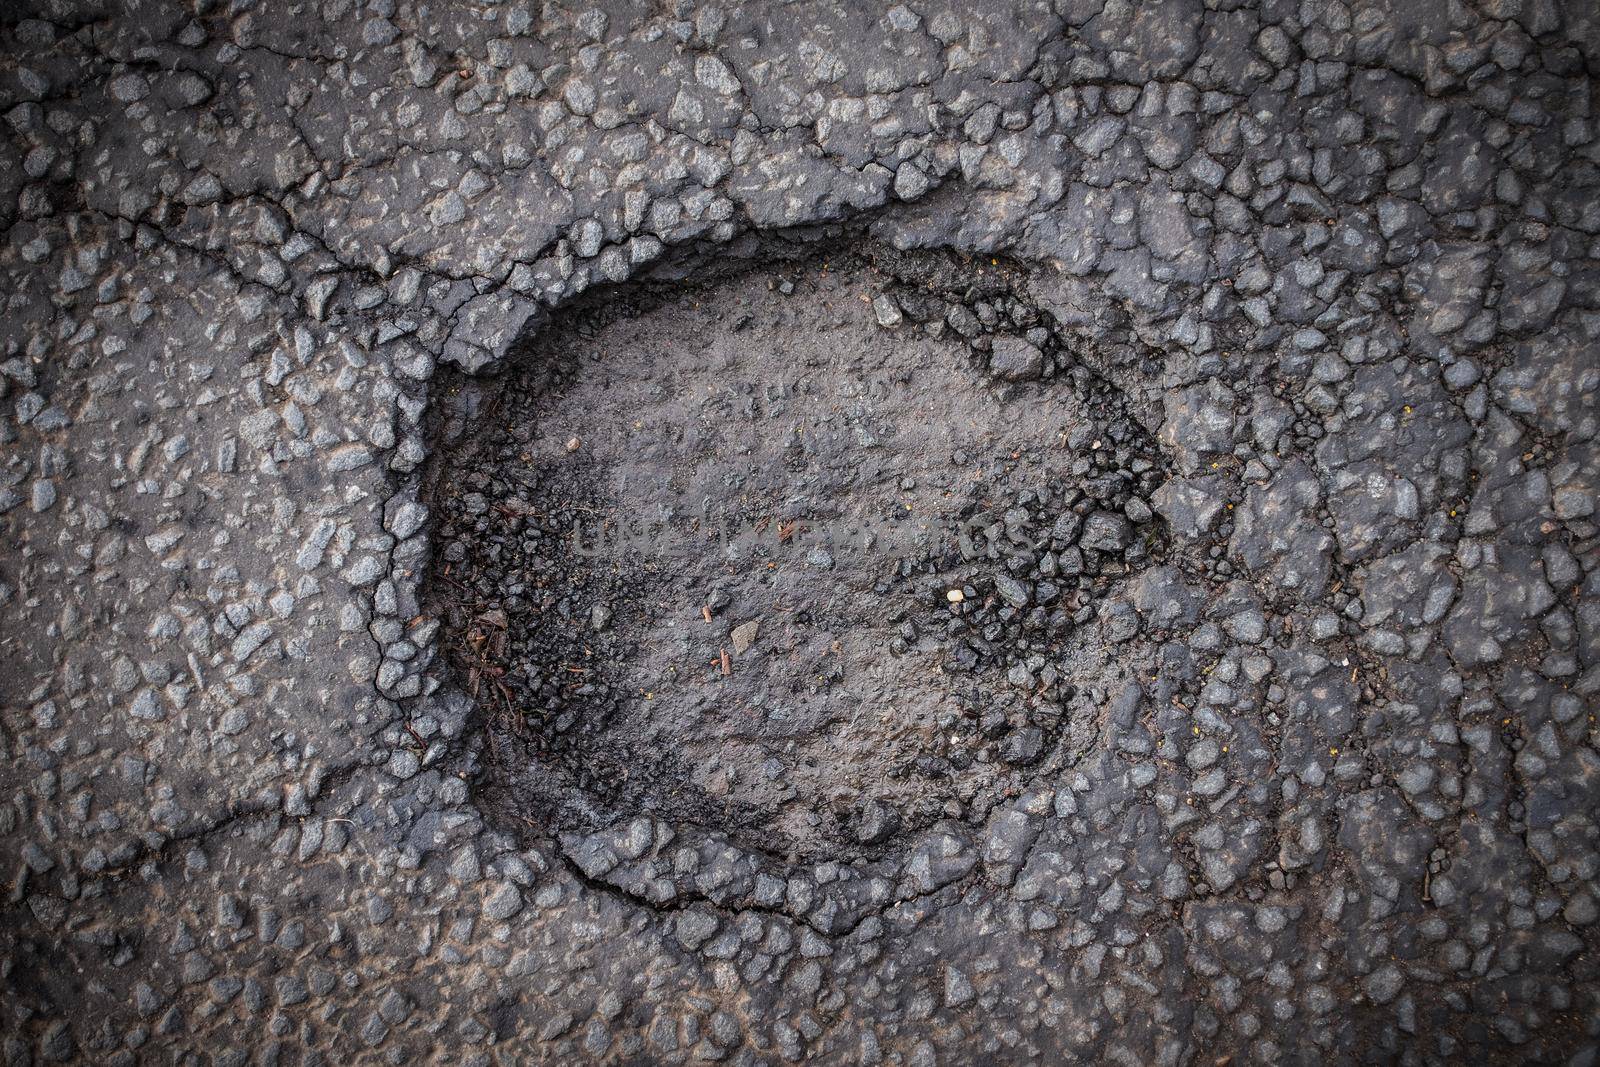 Dangerous Pothole In The Street by mrdoomits